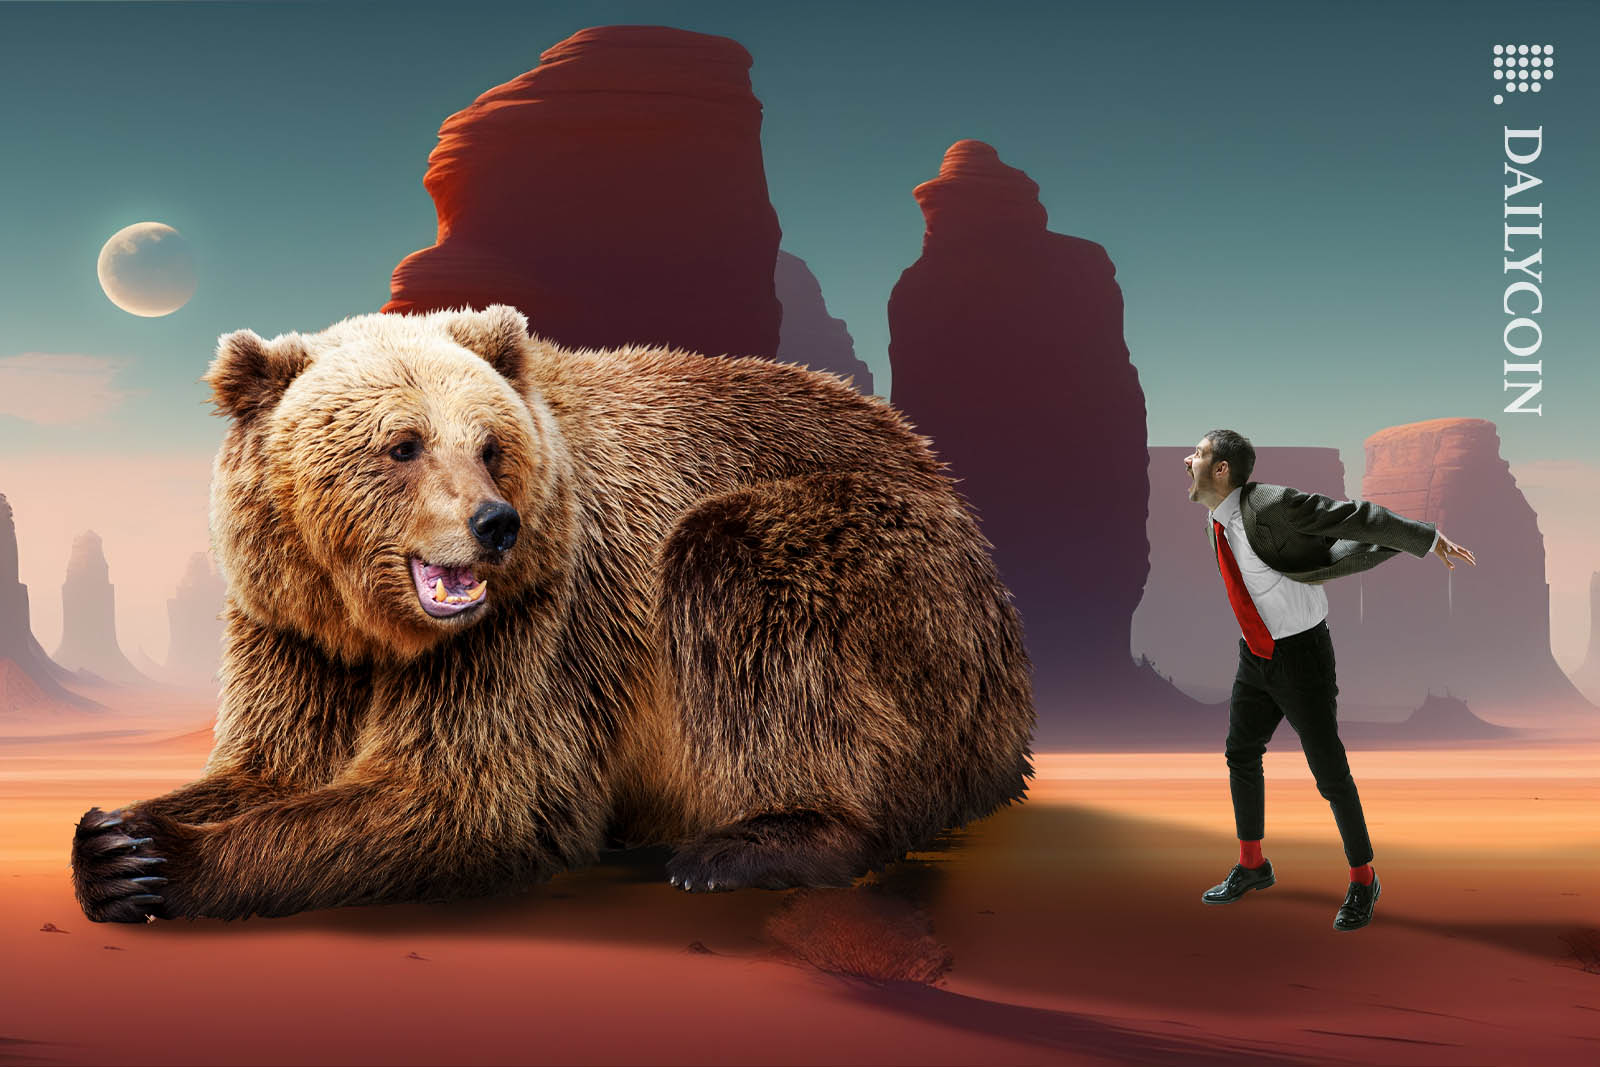 A man in a suit screaming at a bear in a desert.